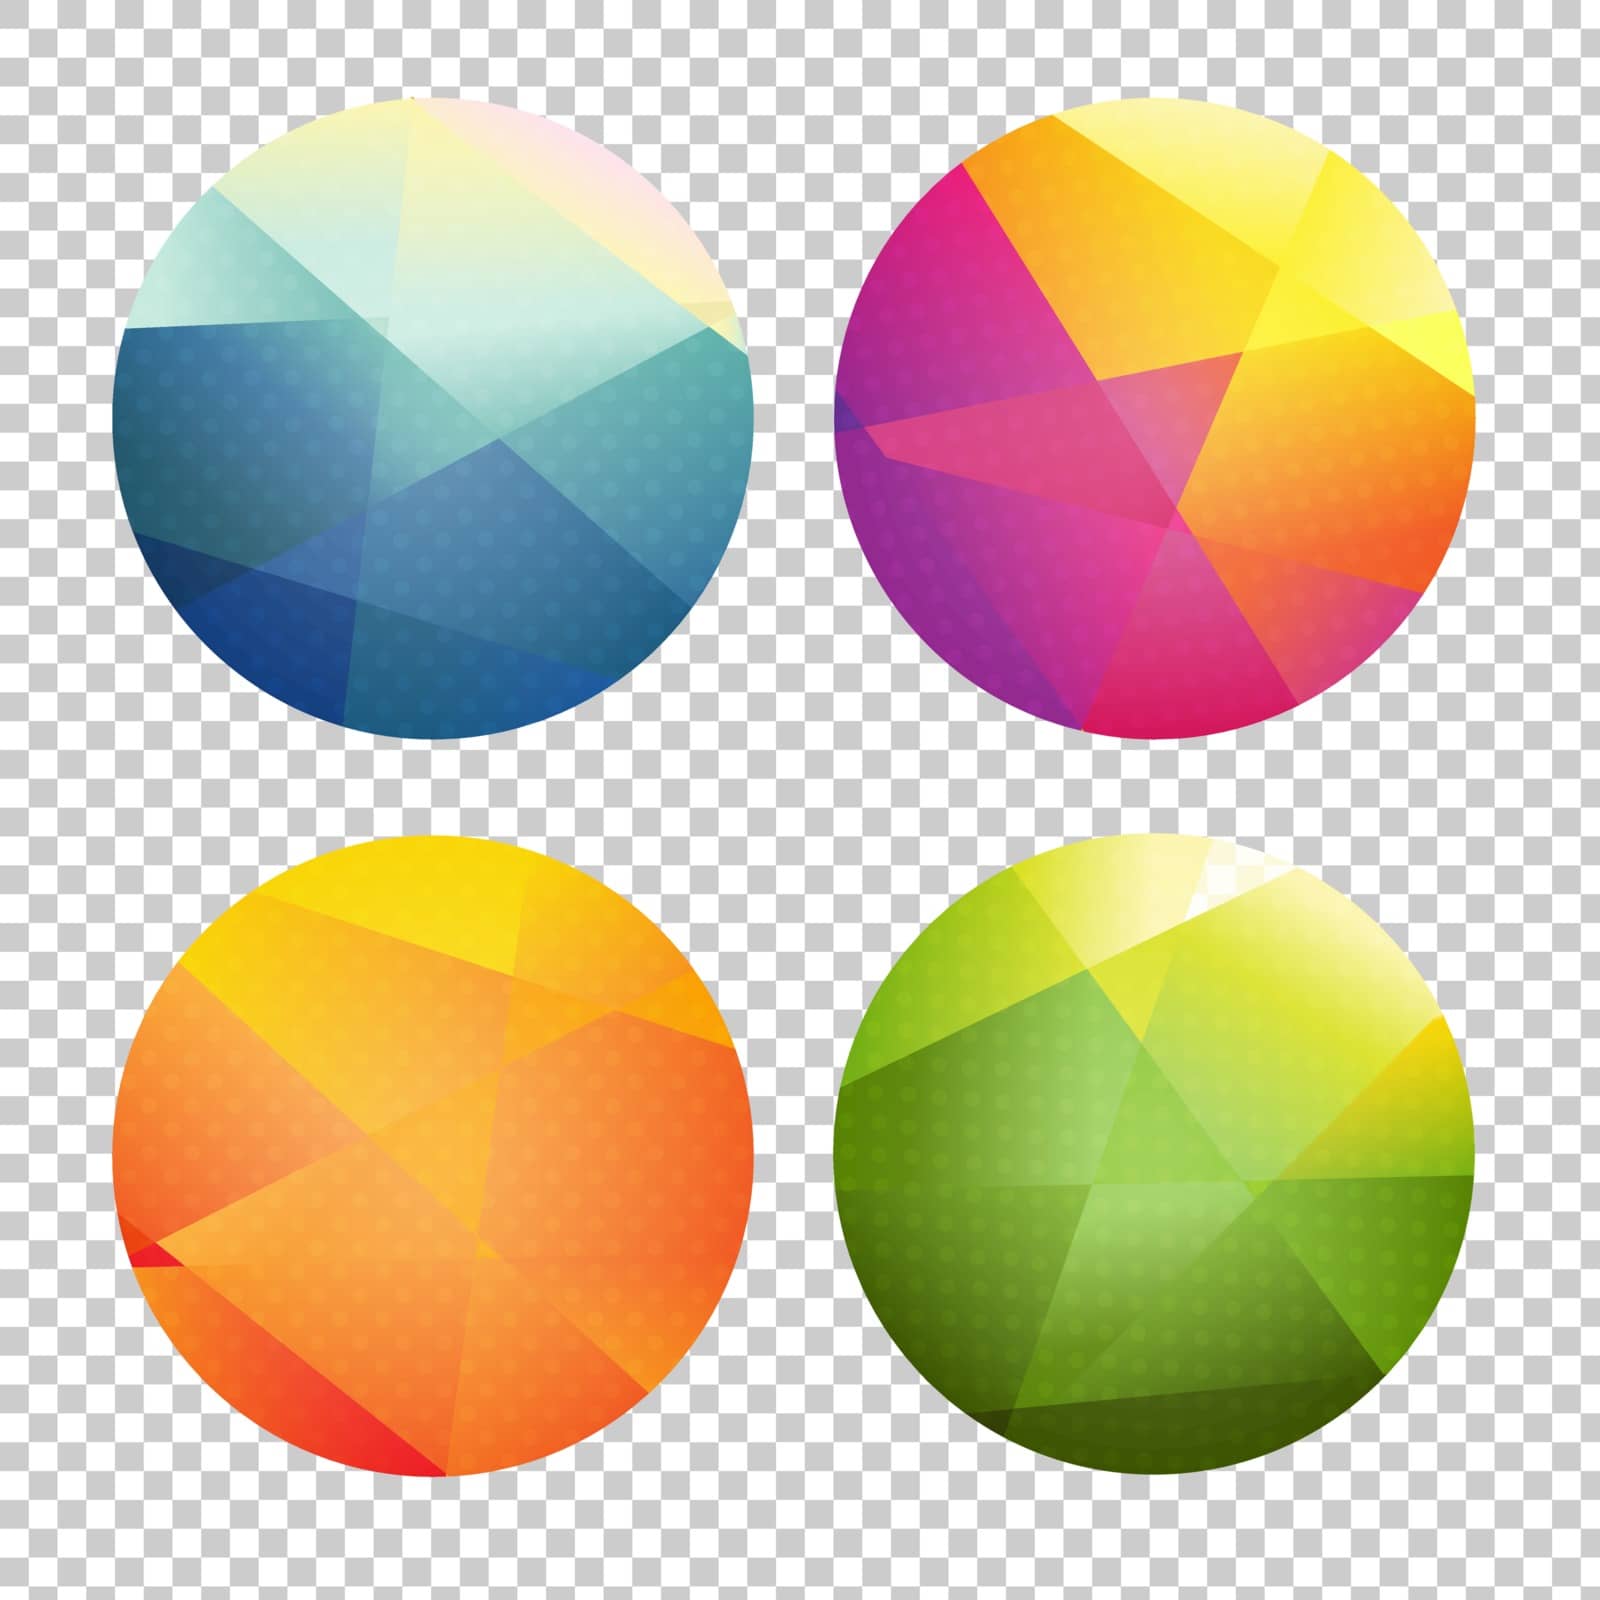 Set Of Color Origami Spheres, Transparent Background, With Gradient Mesh, Vector Illustration